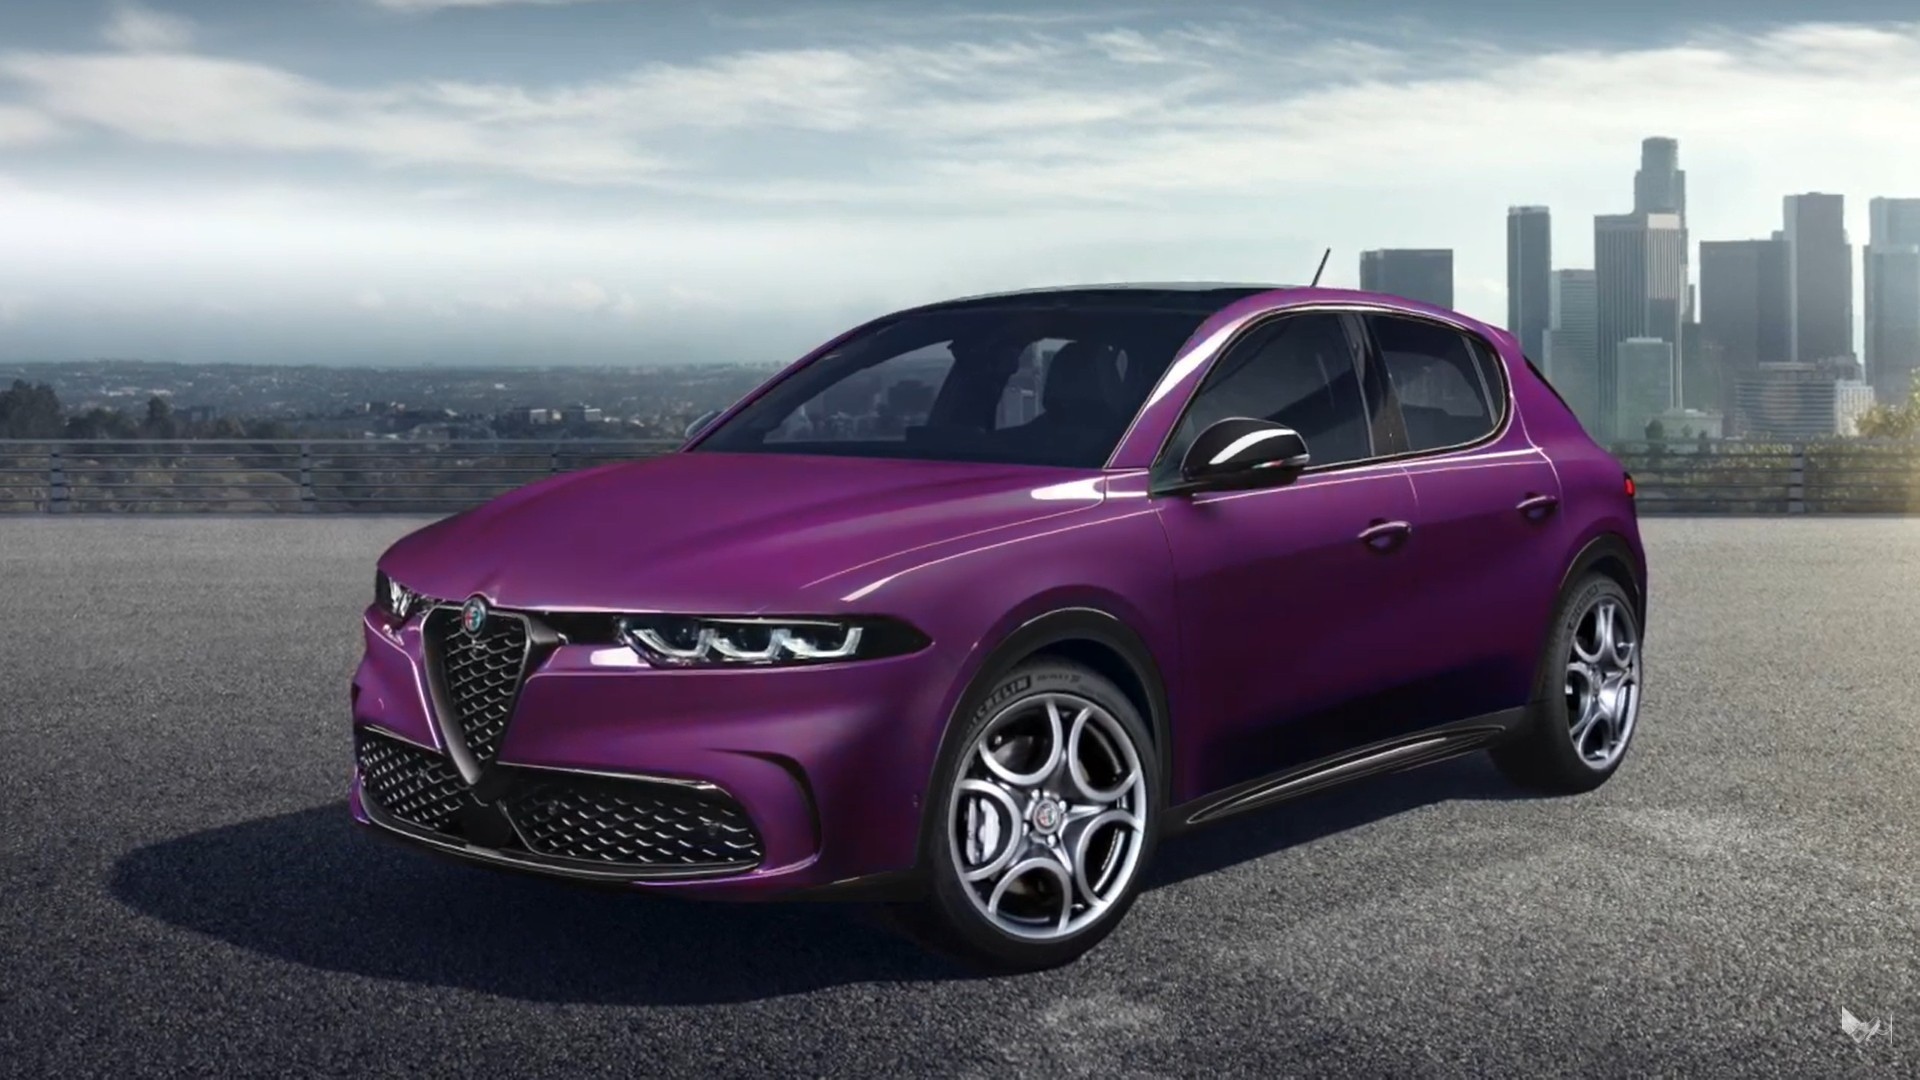 New Alfa Romeo MiTo Reportedly Planned With Five Doors, Electric Powertrain  - autoevolution